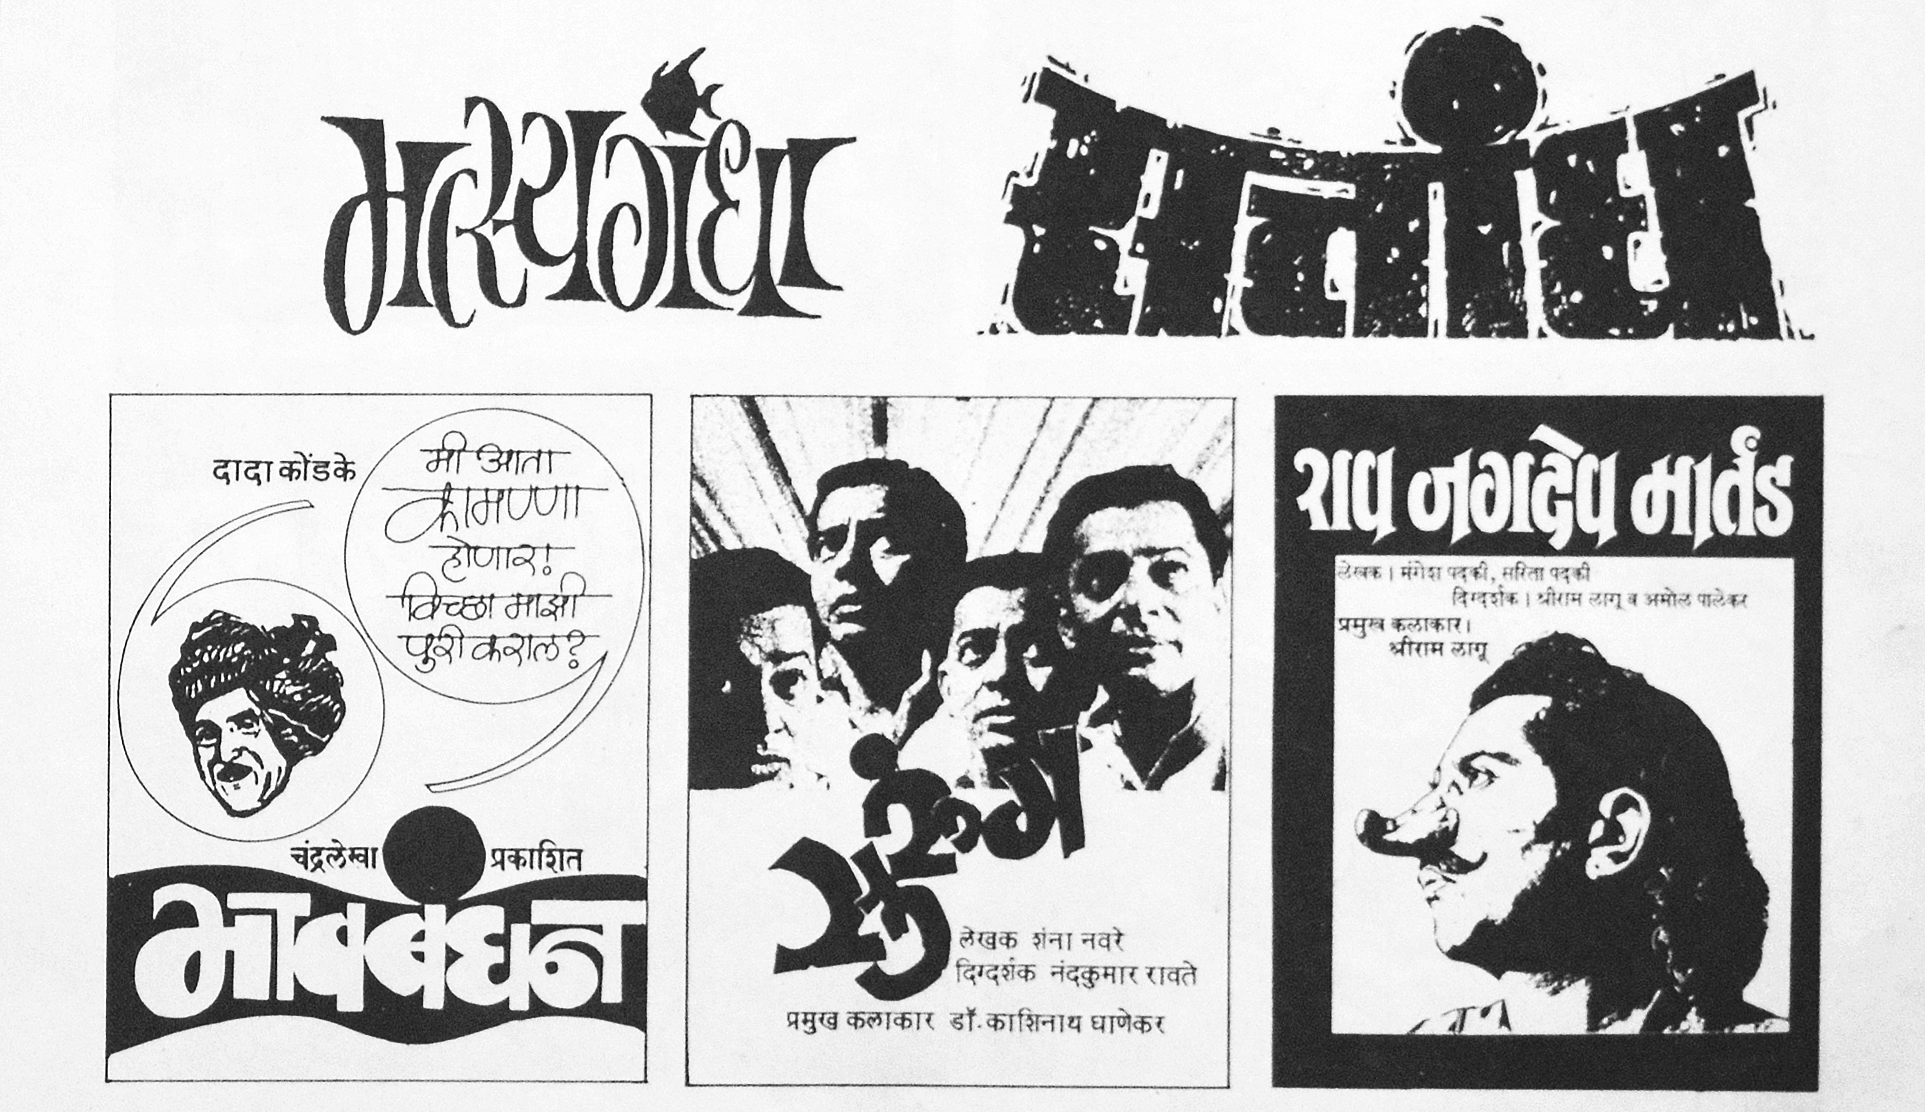 Various Theatre Titles and advertisements designed by Kamal Shedge. On the top-left is the design for “Matsyagandha” which launched his title design career.